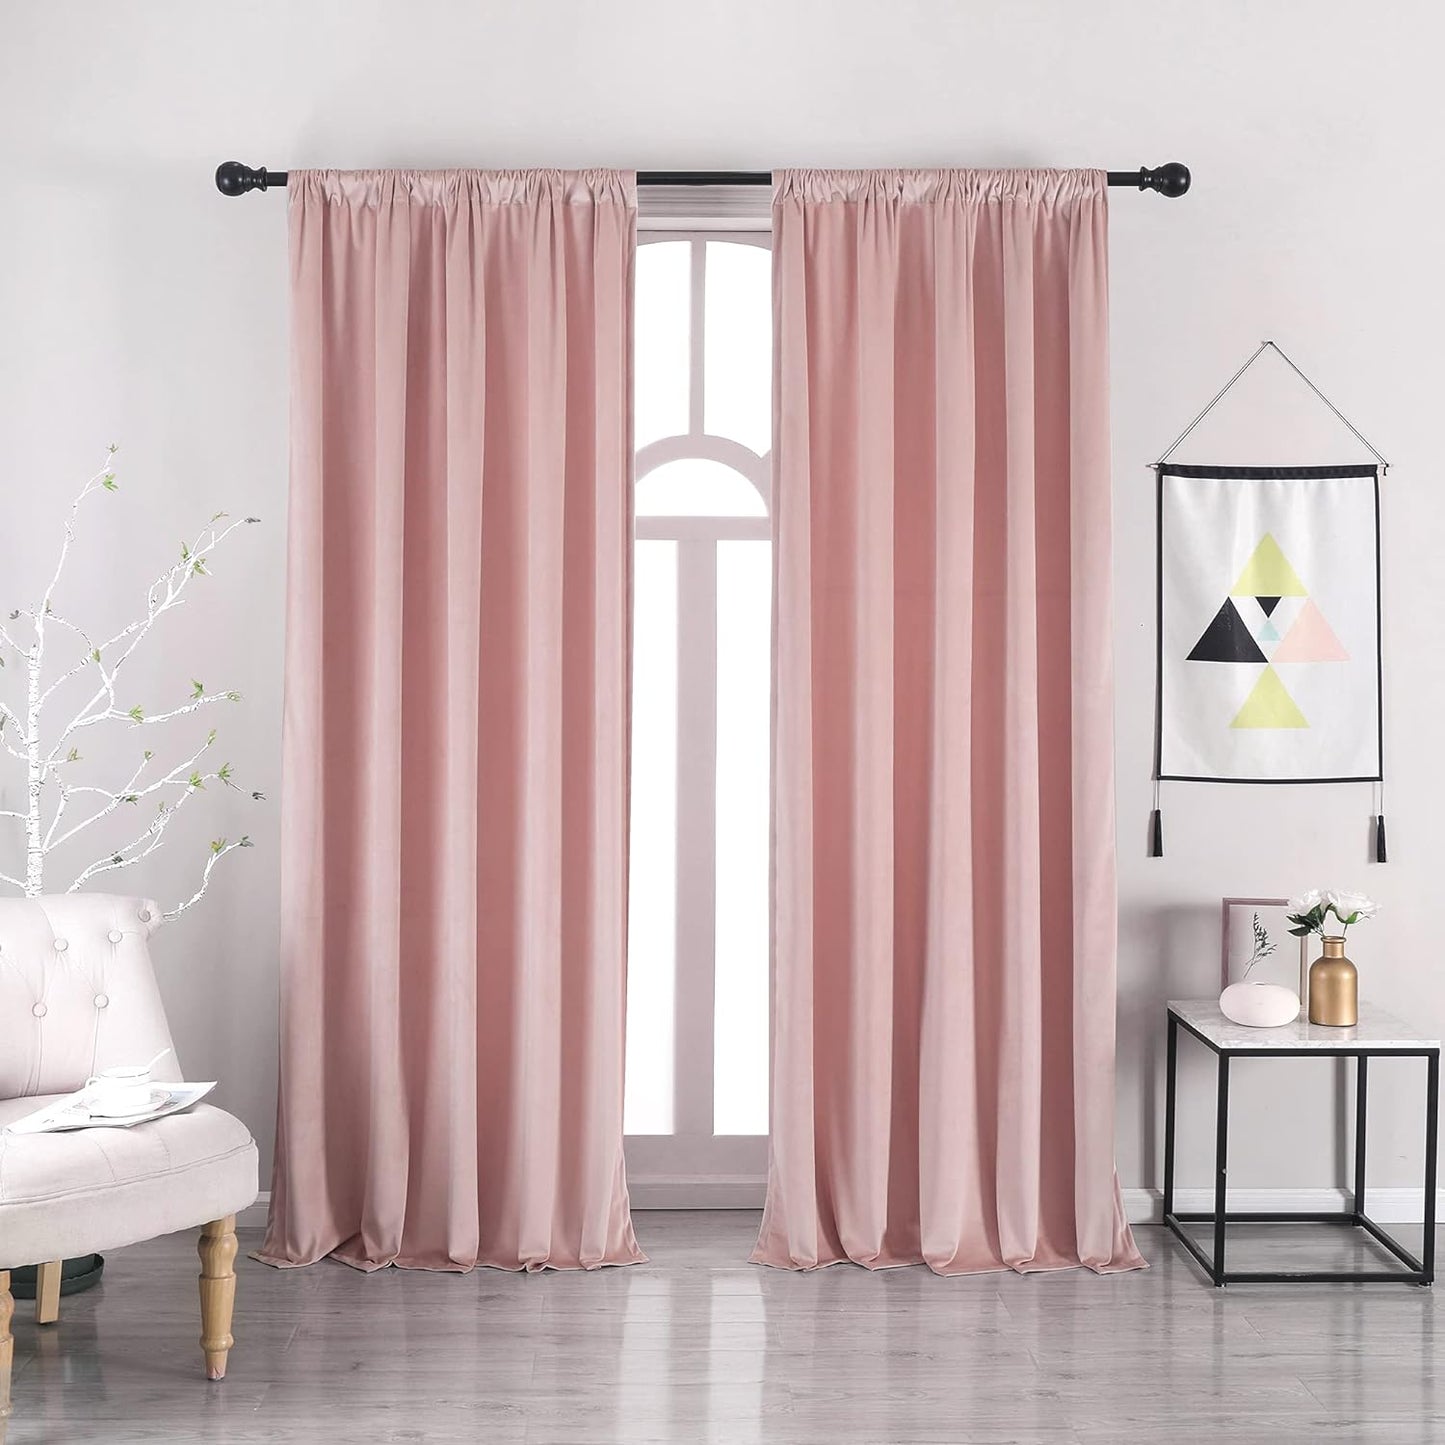 Nanbowang Green Velvet Curtains 63 Inches Long Dark Green Light Blocking Rod Pocket Window Curtain Panels Set of 2 Heat Insulated Curtains Thermal Curtain Panels for Bedroom  nanbowang Pink 52"X72" 